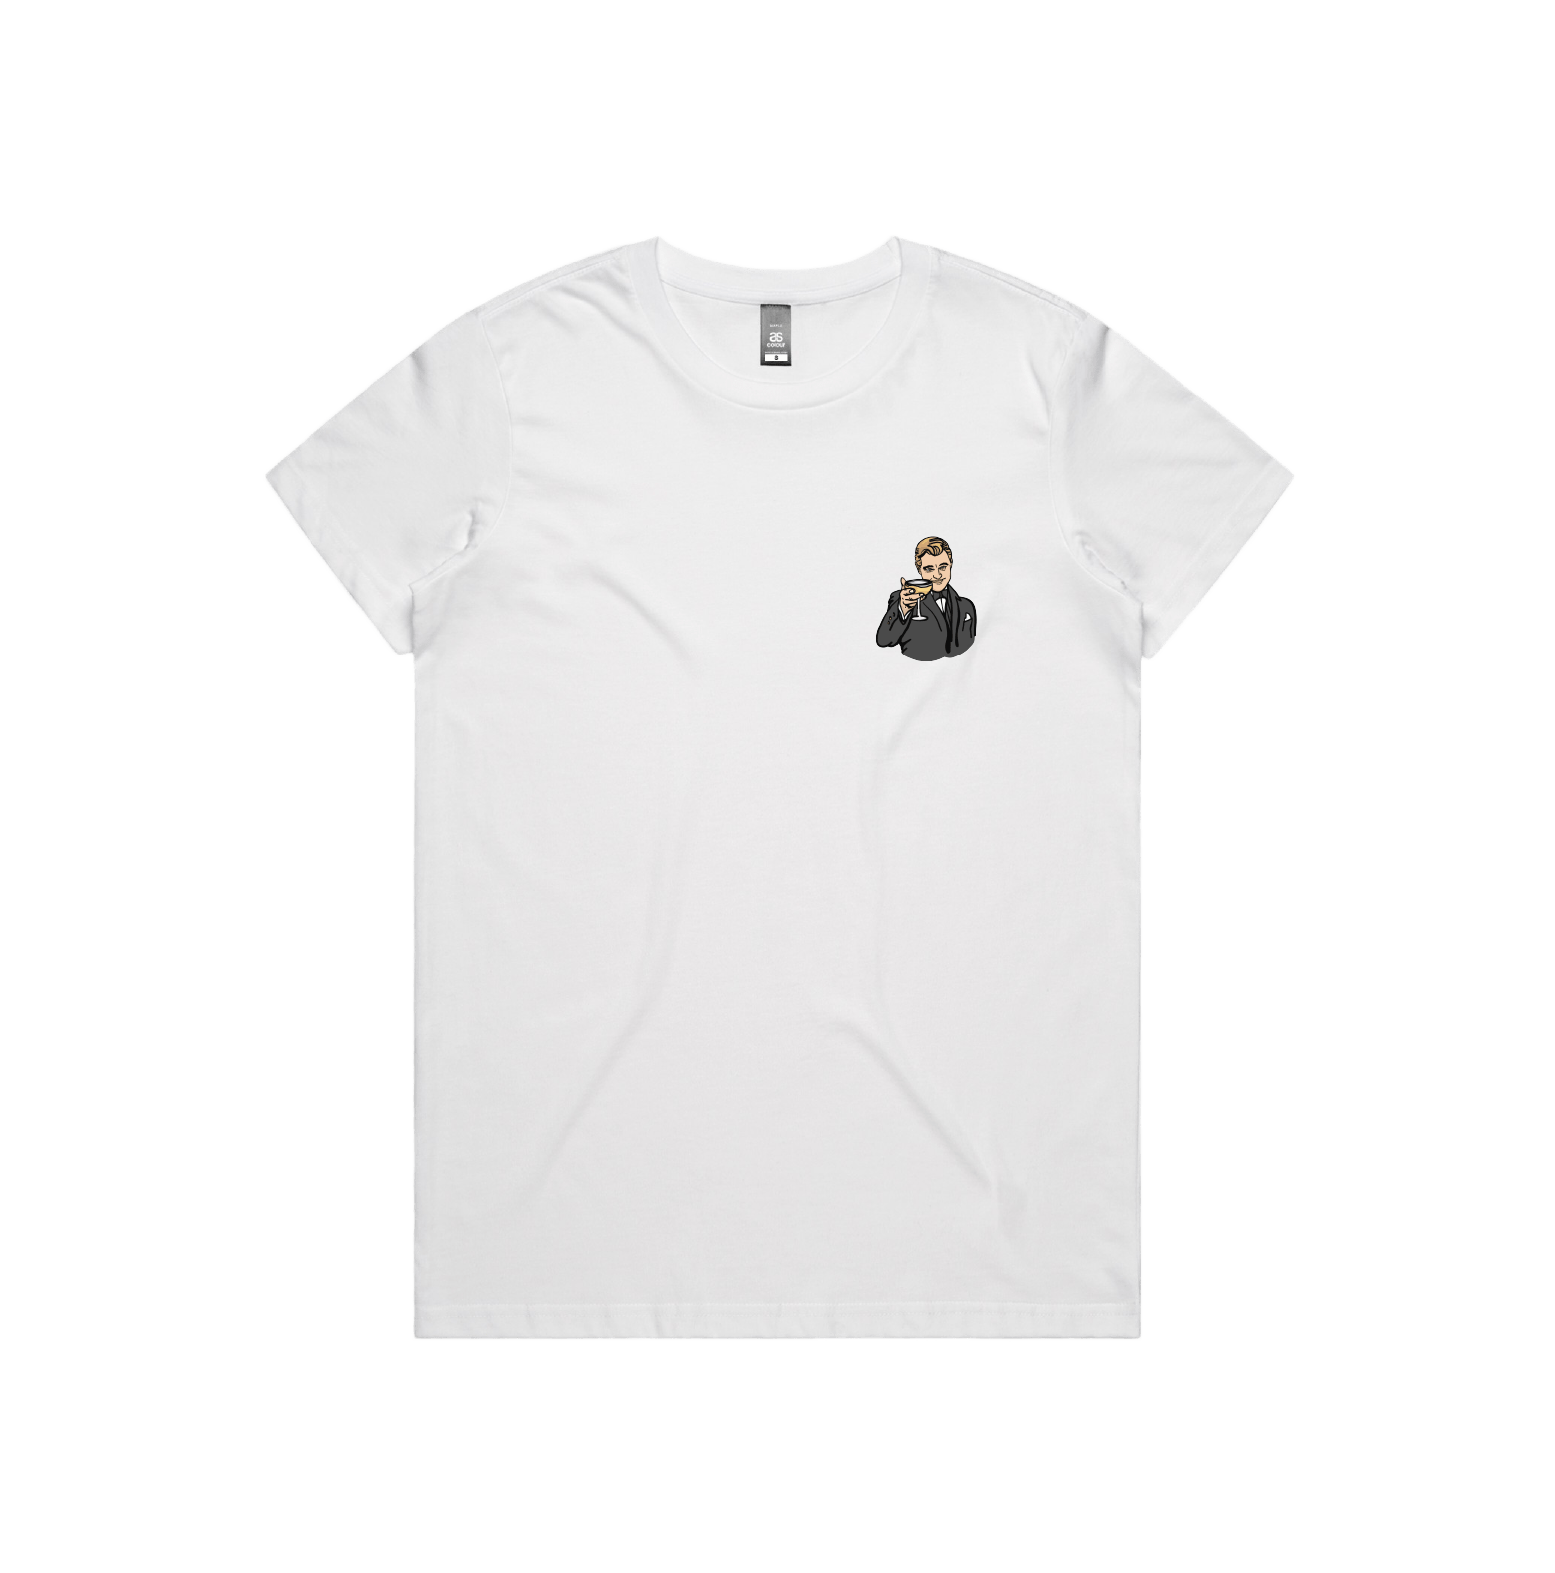 XS / White / Small Front Design DiCaprio Gatsby Cheers 🍸 - Women's T Shirt